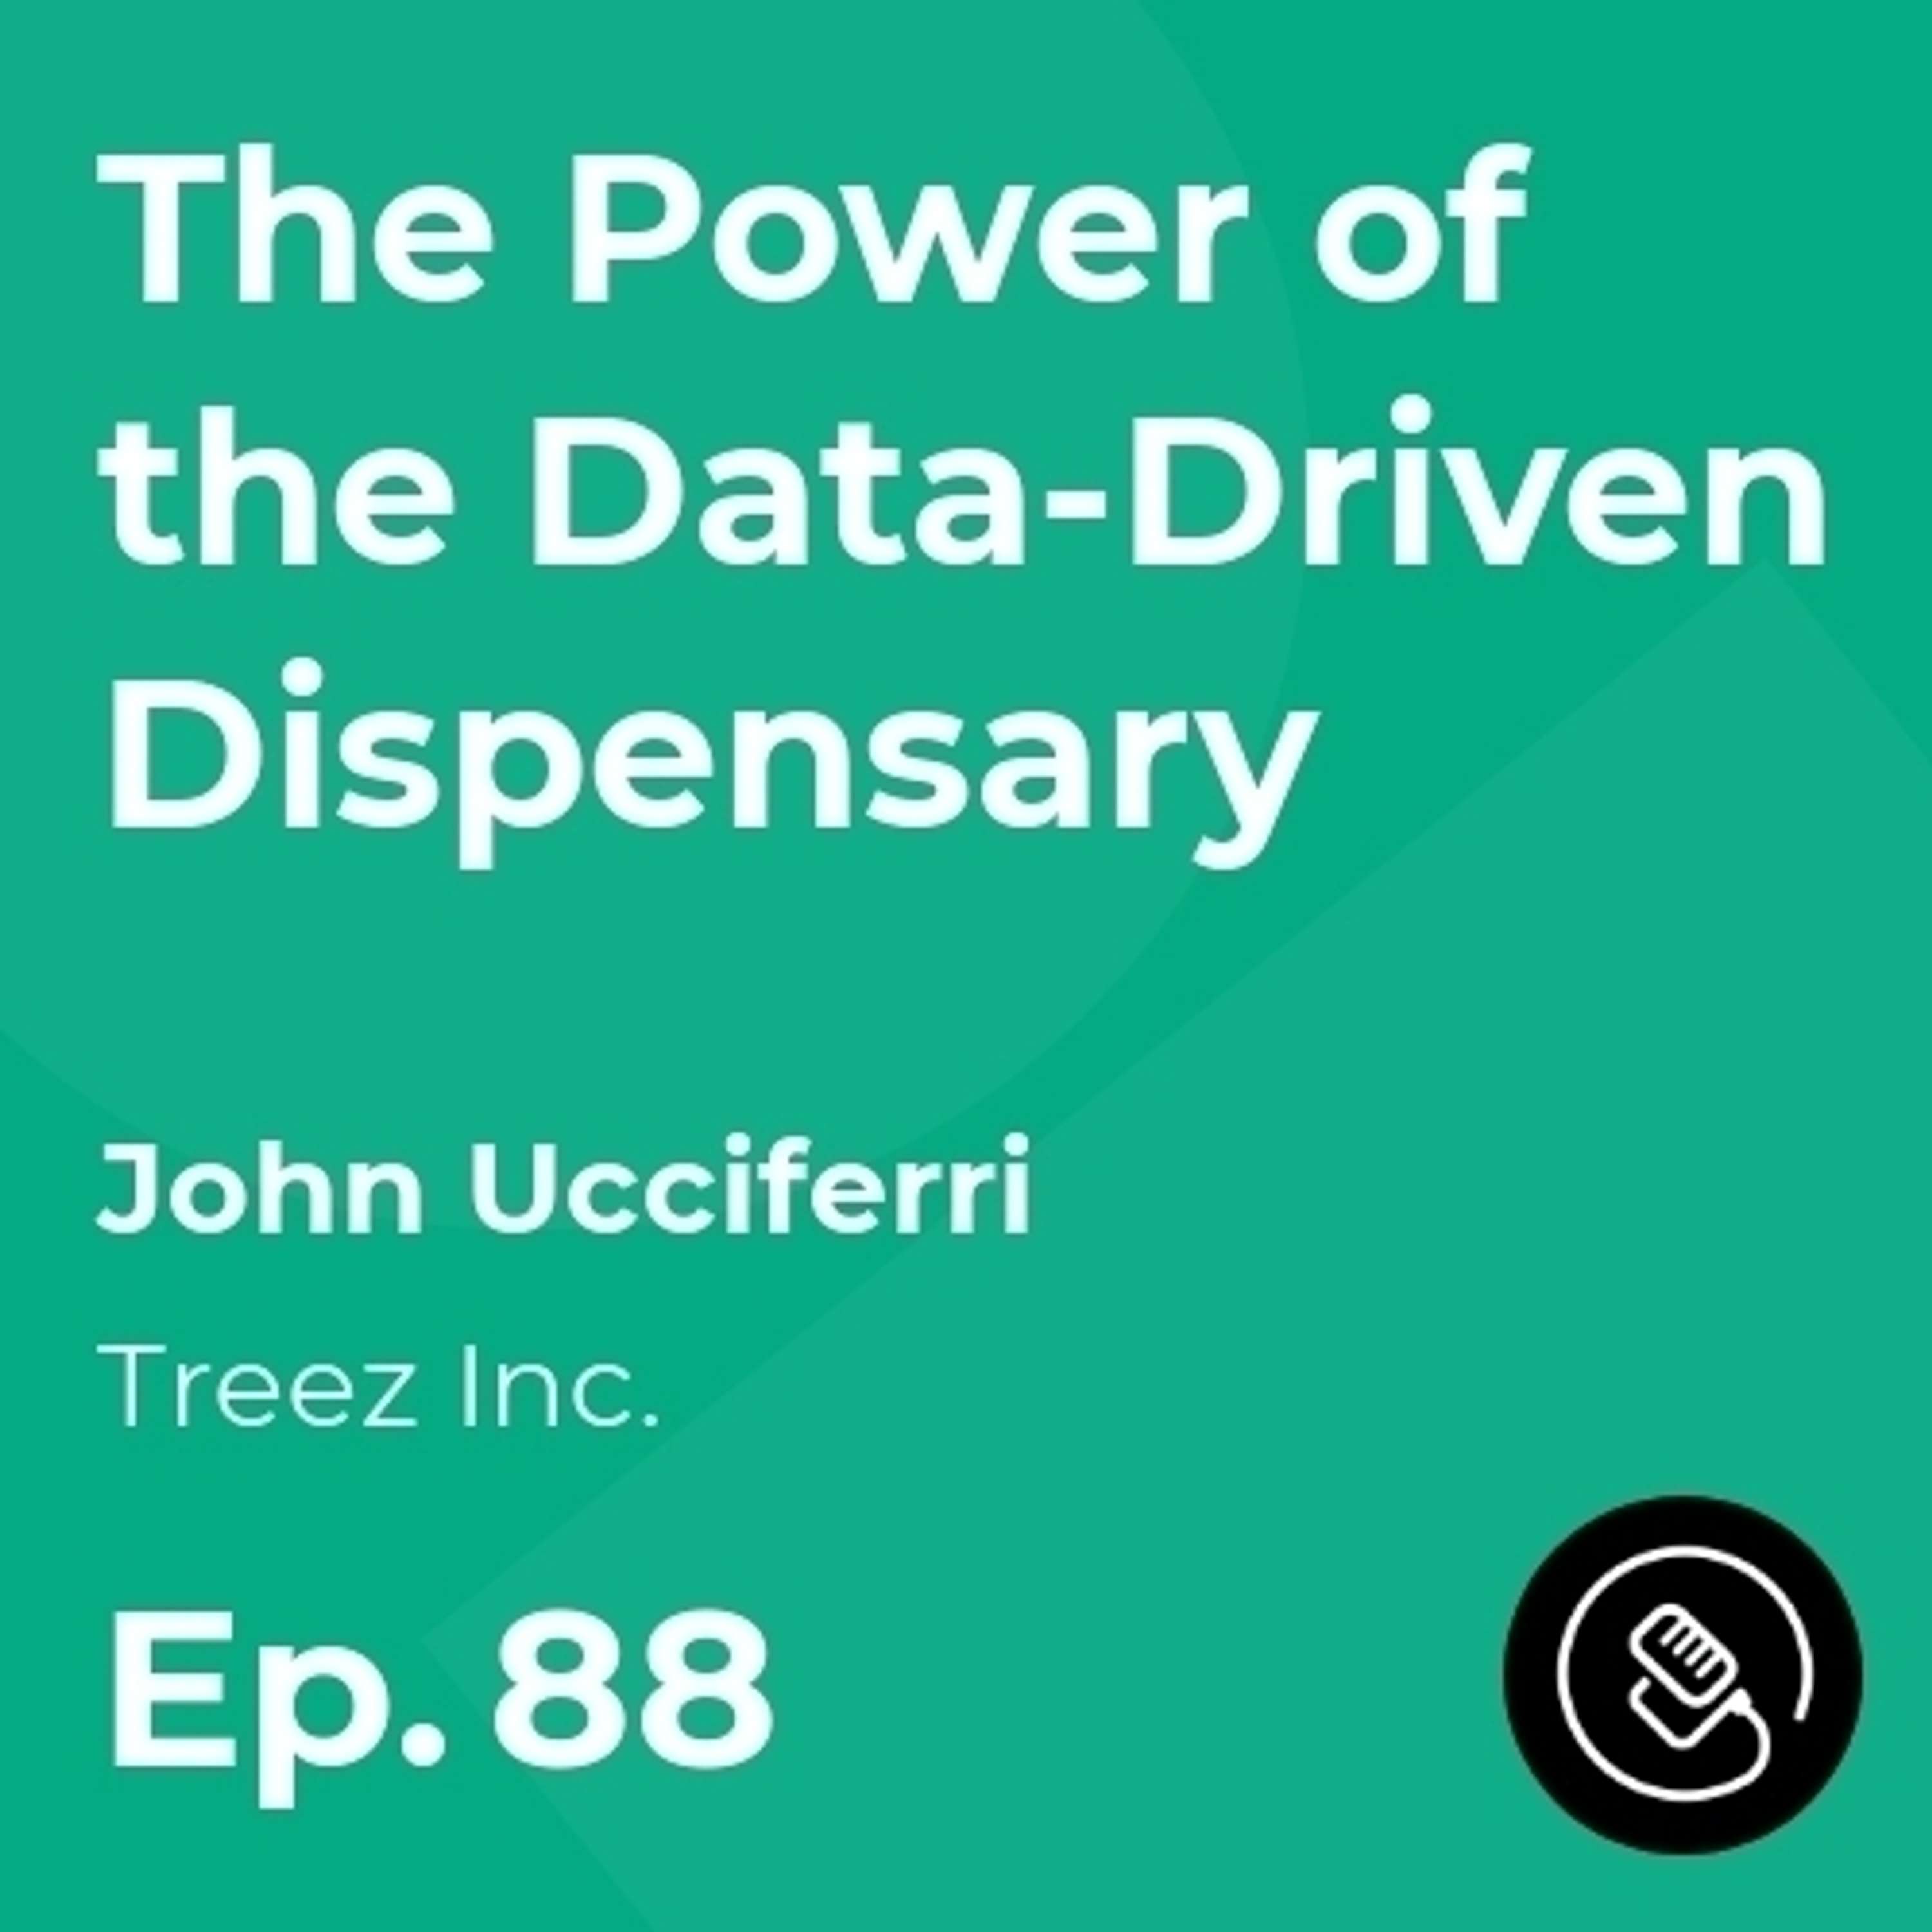 The Power of the Data-Driven Dispensary